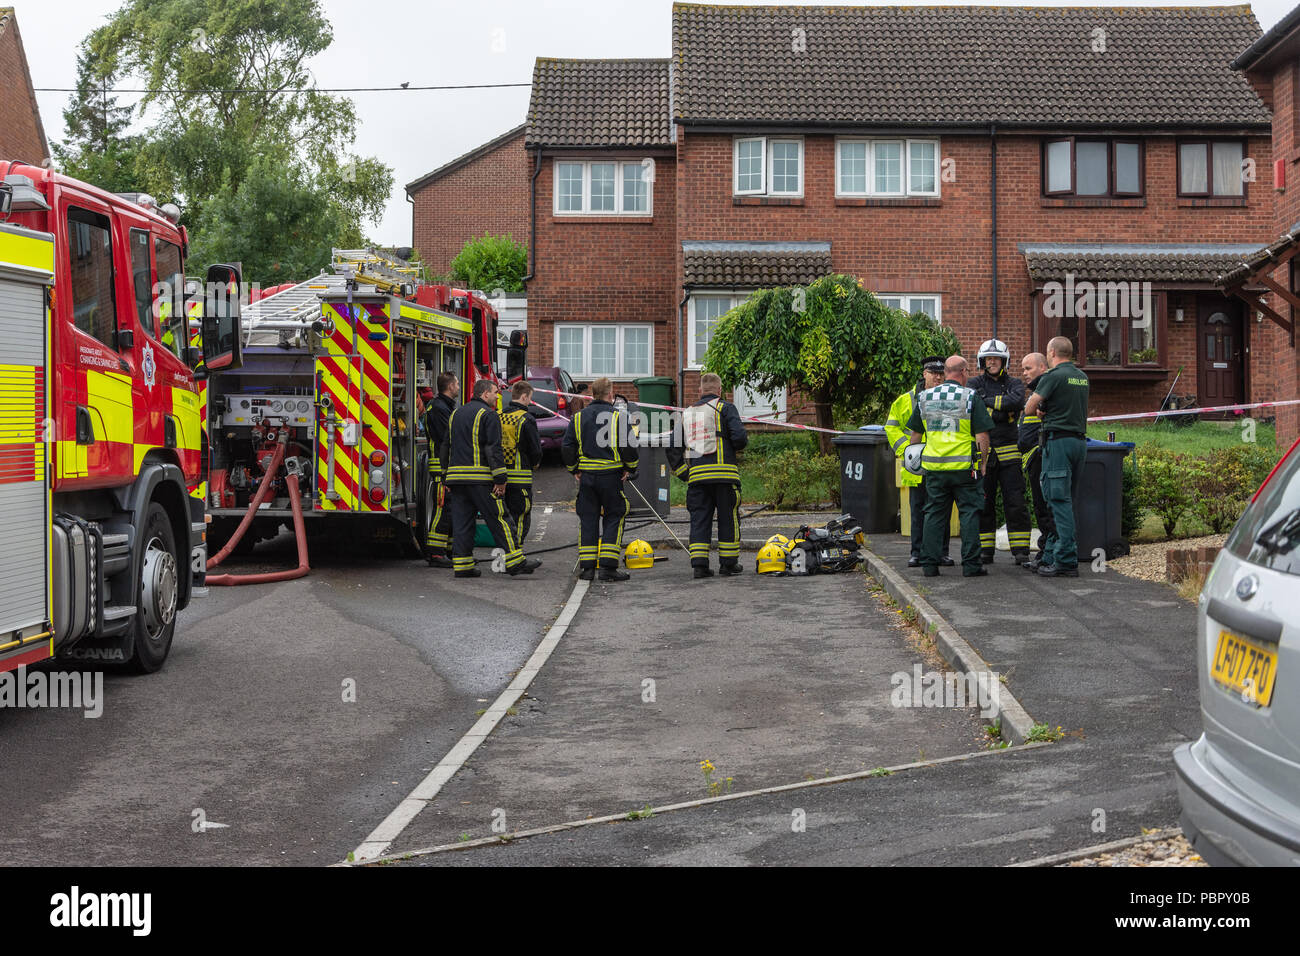 Westbury Wiltshire UK 29th July 2018   A woman opened a package from amazon and suffered burns to her finger from unidentified white powder.  Emergency services treat incident with extreme caution due to ongoing novichok case in county.  Substance tested non harmful. Emergency services outside house where package was opened waiting for hazmat to arrive to test  Credit Estelle Bowden/Alamy live news Stock Photo